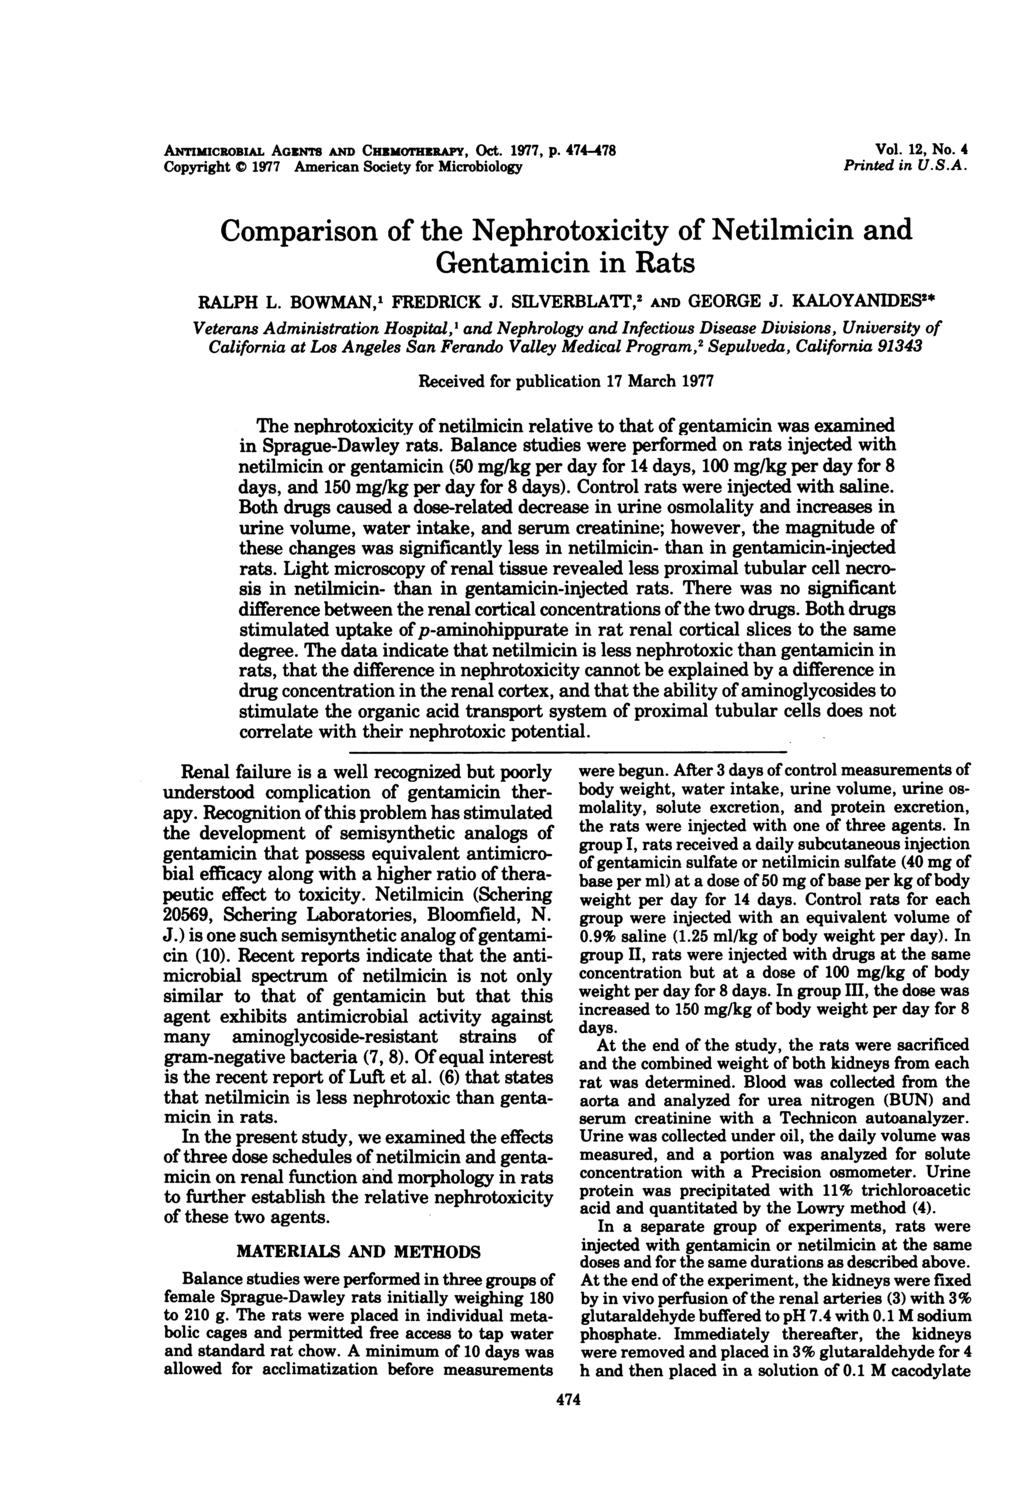 ANTIMICRoBIAL AGENTs AND CHUMOTHKRAY, Oct. 1977, P. 474-478 Copyright 0 1977 American Society for Microbiology Vol. 12, No. 4 Printed in U.S.A. Comparison of the Nephrotoxicity of Netilmicin and Gentamicin in Rats RALPH L.